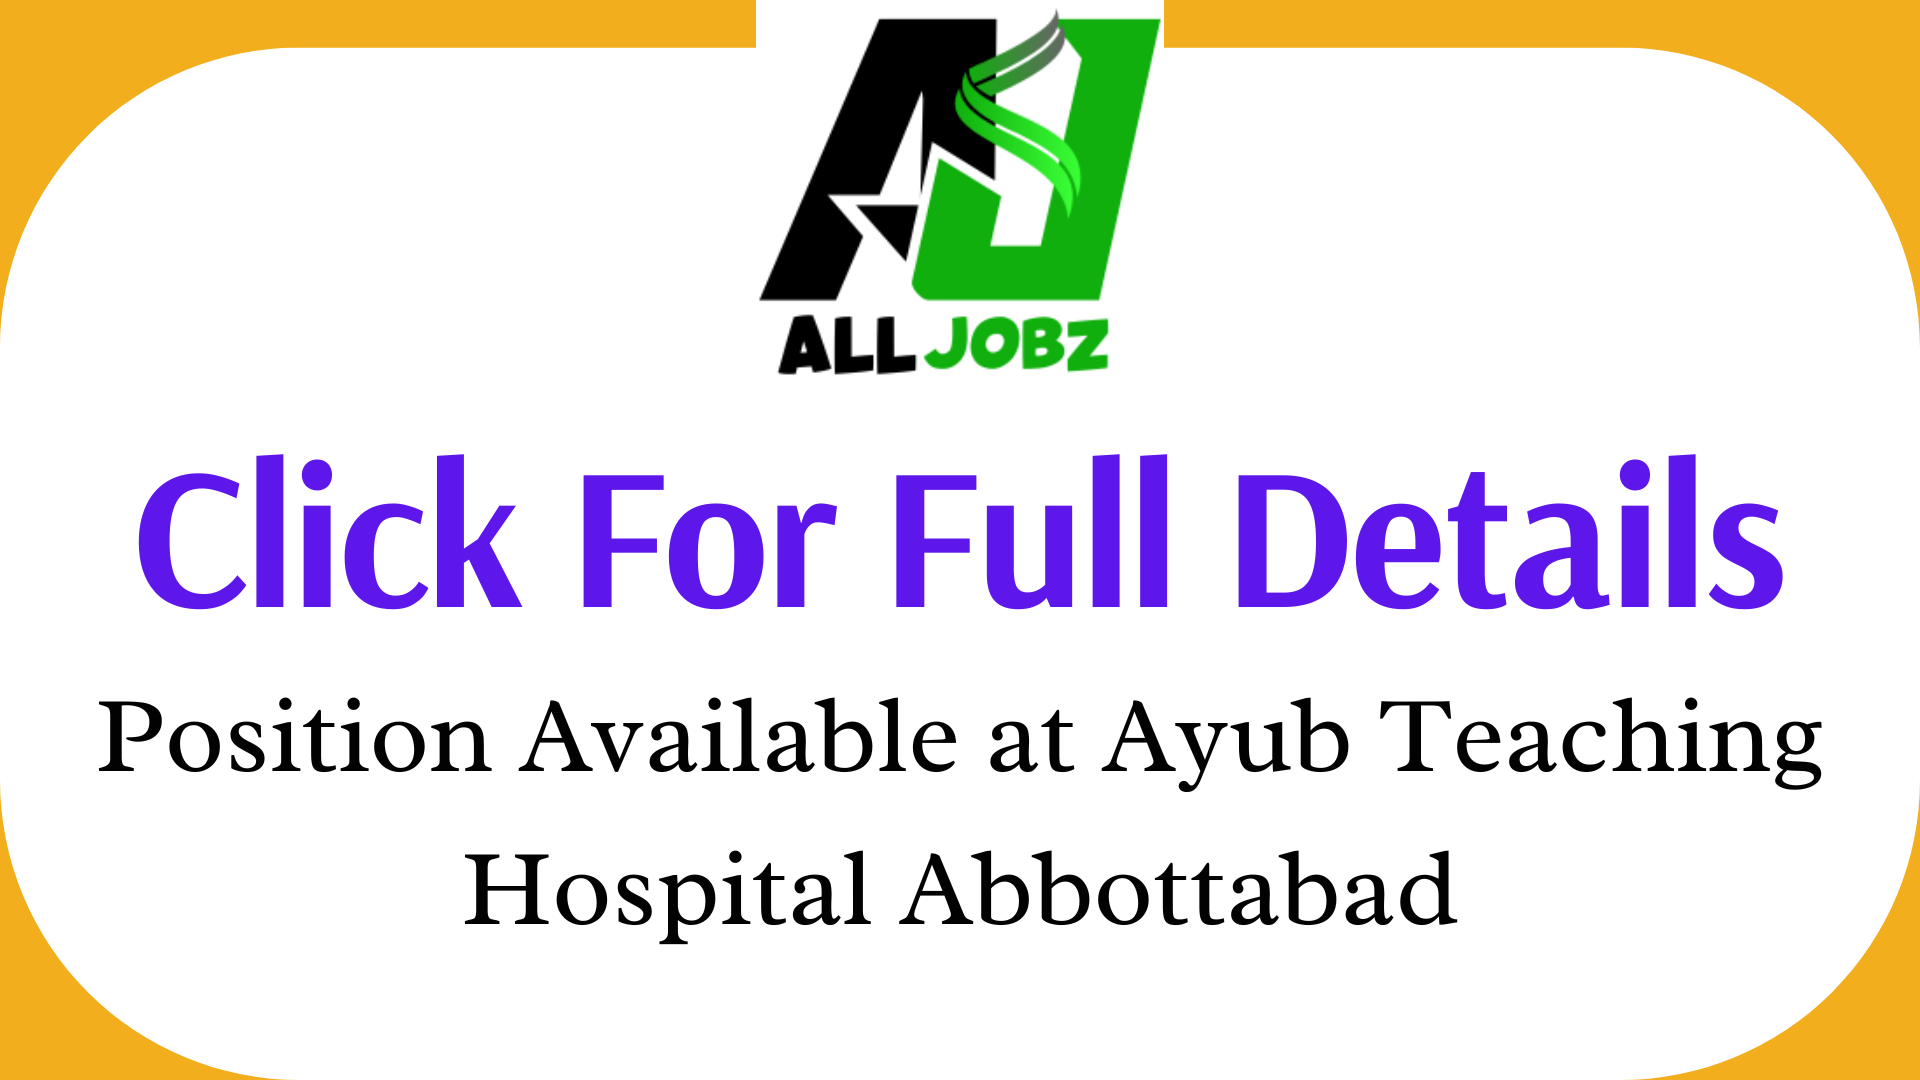 Position Available At Ayub Teaching Hospital Abbottabad, Ayub Teaching Hospital Abbottabad Jobs 2024 Salary, Ayub Teaching Hospital Abbottabad Jobs 2024 Last Date, Abbottabad Hospital Jobs, Ayub Teaching Hospital Abbottabad Jobs 2024 Apply Online Ayub Teaching Hospital Abbottabad Jobs 2024 For Nurses, Ayub Teaching Hospital Abbottabad Jobs 2024 Contact Number, Abbottabad Medical Complex Jobs, Ayub Teaching Hospital Abbottabad Official Website,